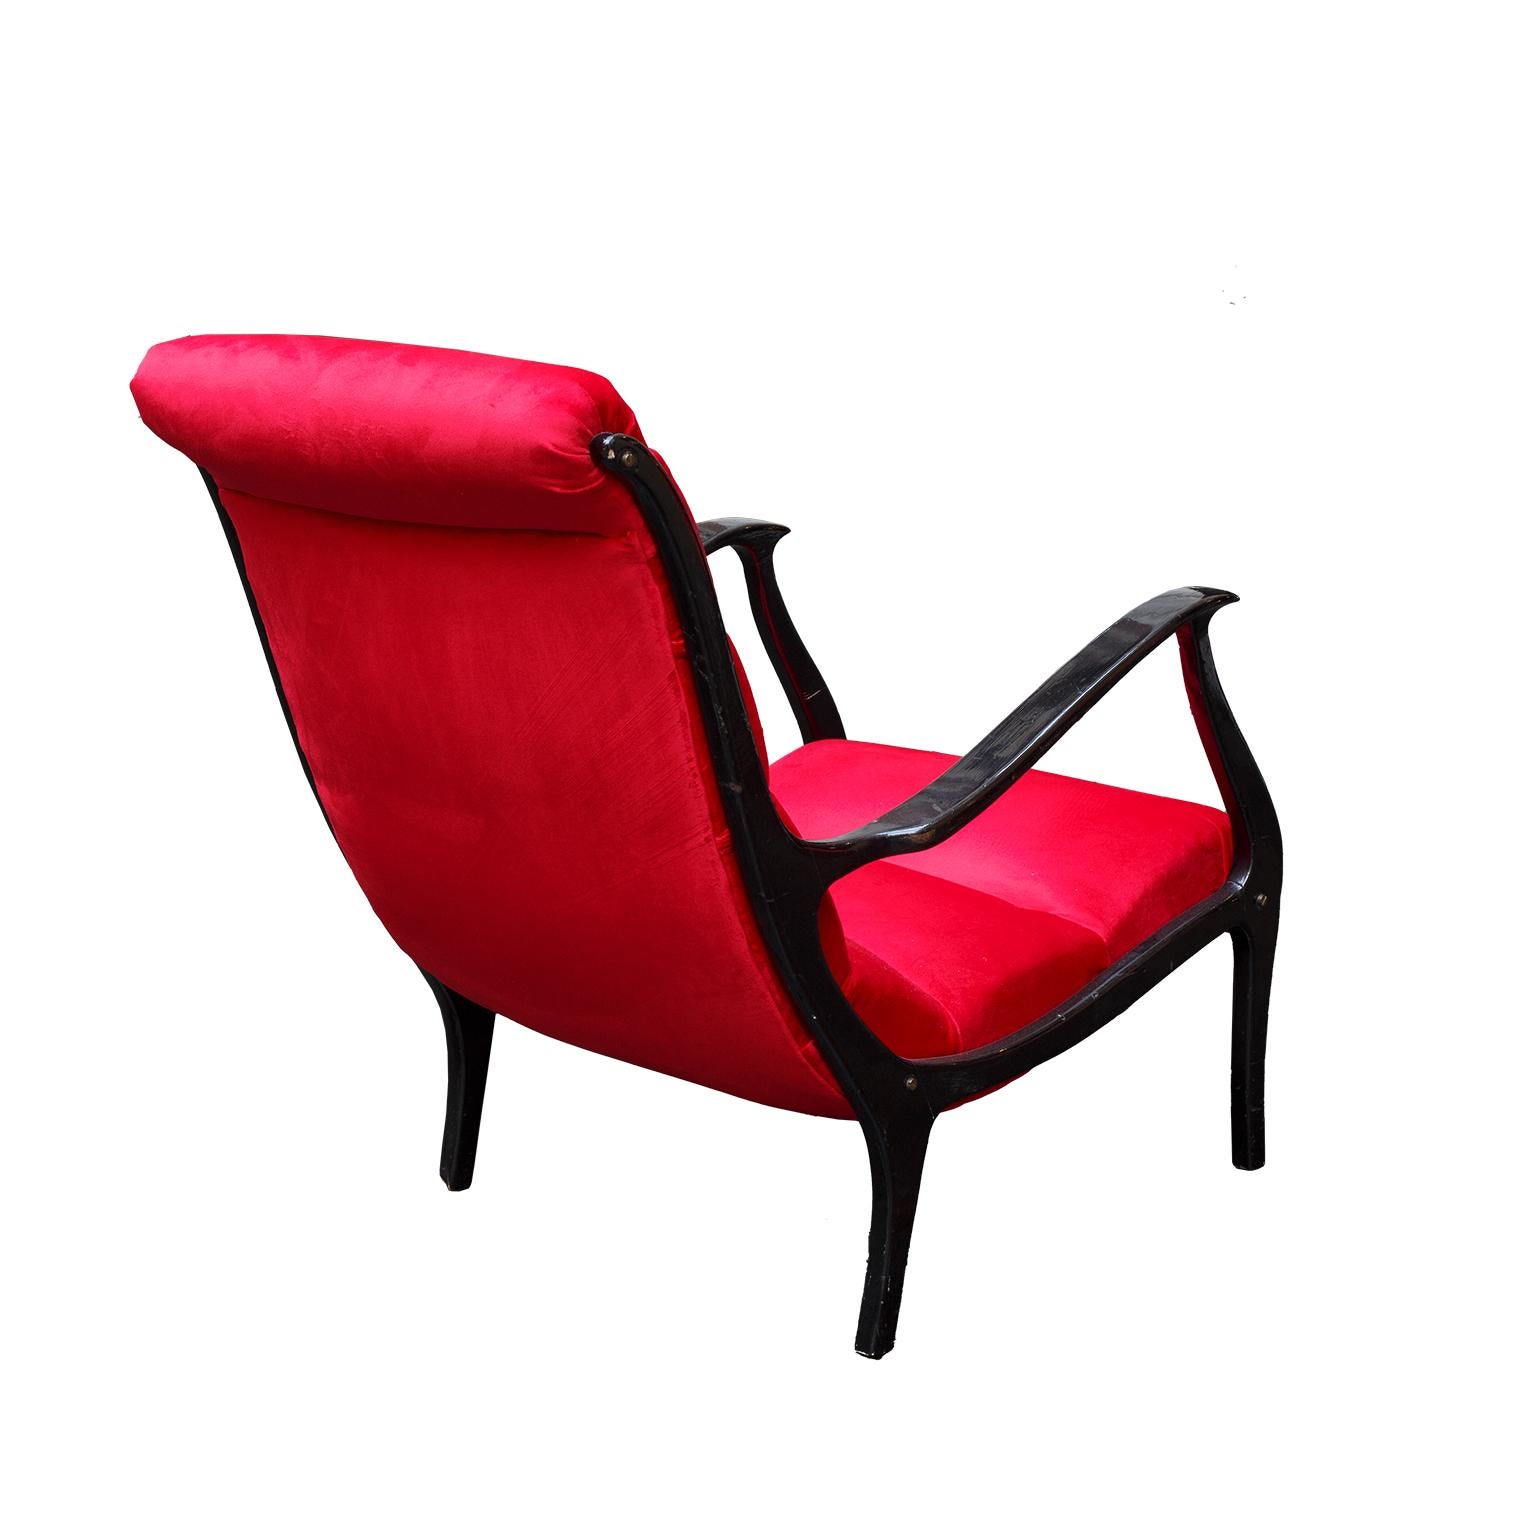 Ezio Longhi armchair Mid-Century Modern Italy 1950s in black paint wood and red velvet new.
it is very nice and confortable seat.